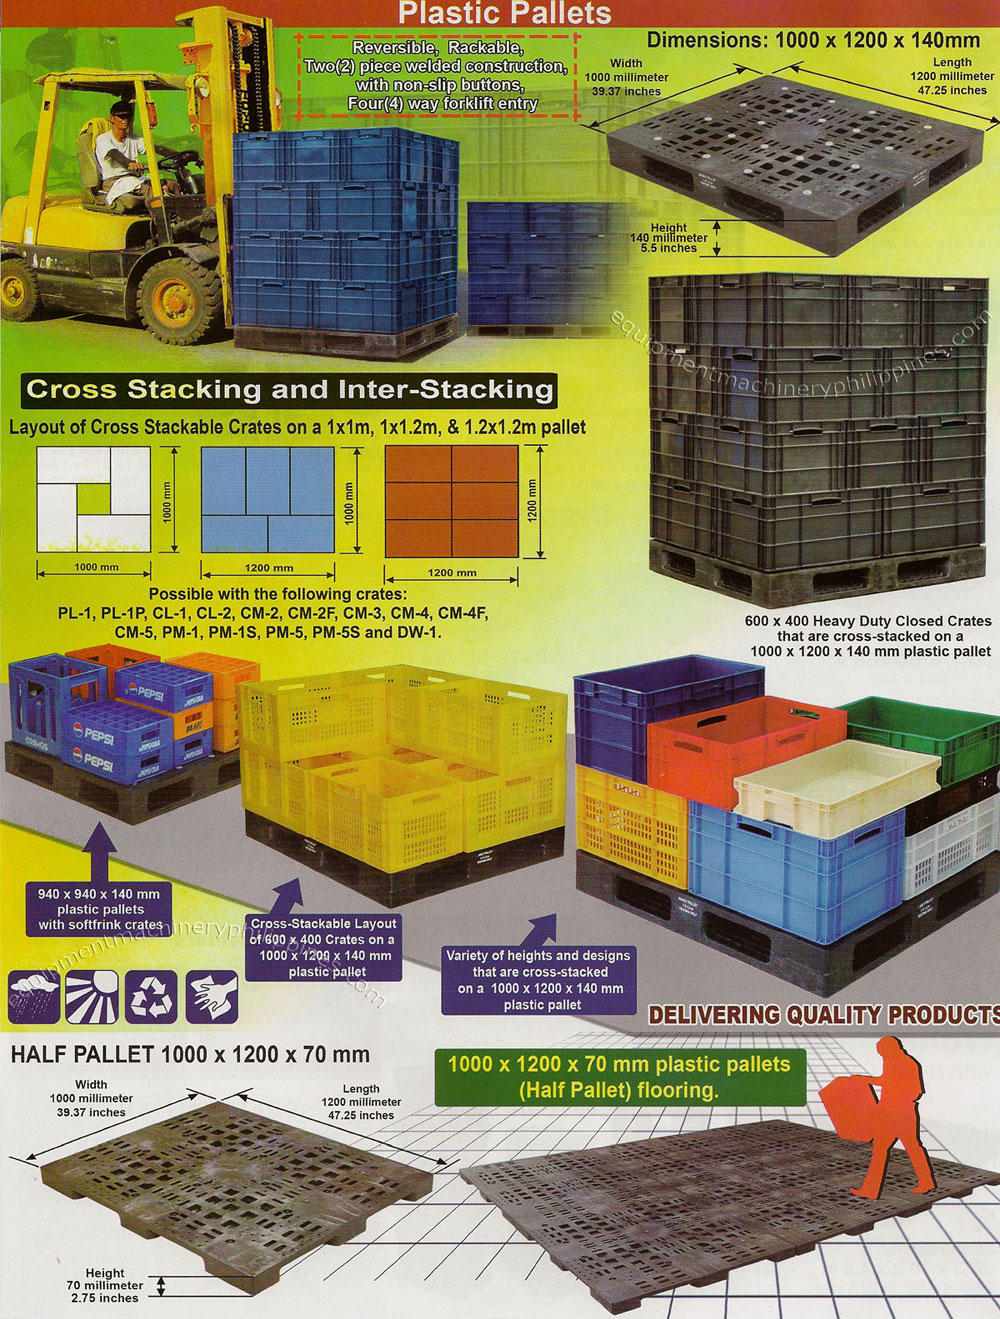 Plastic Pallets - Cross Stacking and Inter Stacking